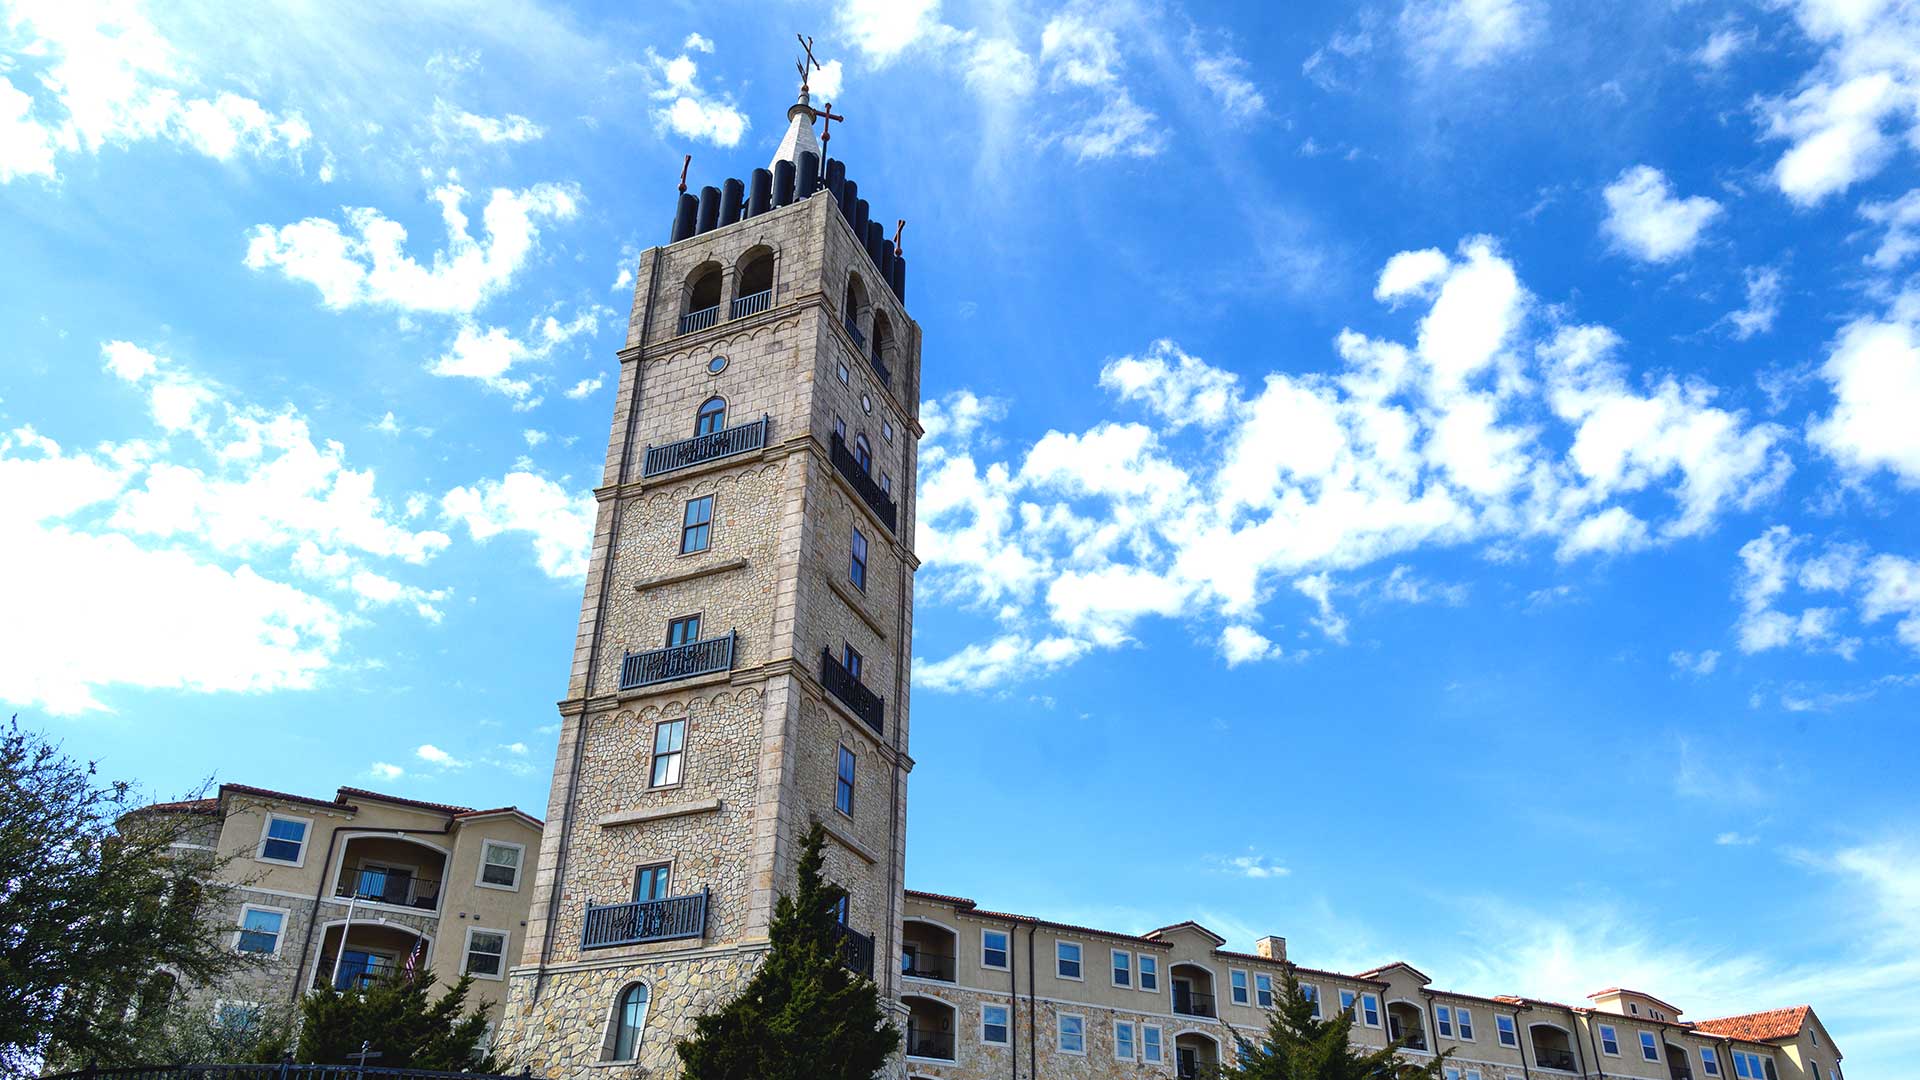 Looking up the stone Bell Tower at Adriatica. A matching apartment building is in the background on a partially cloudy day.